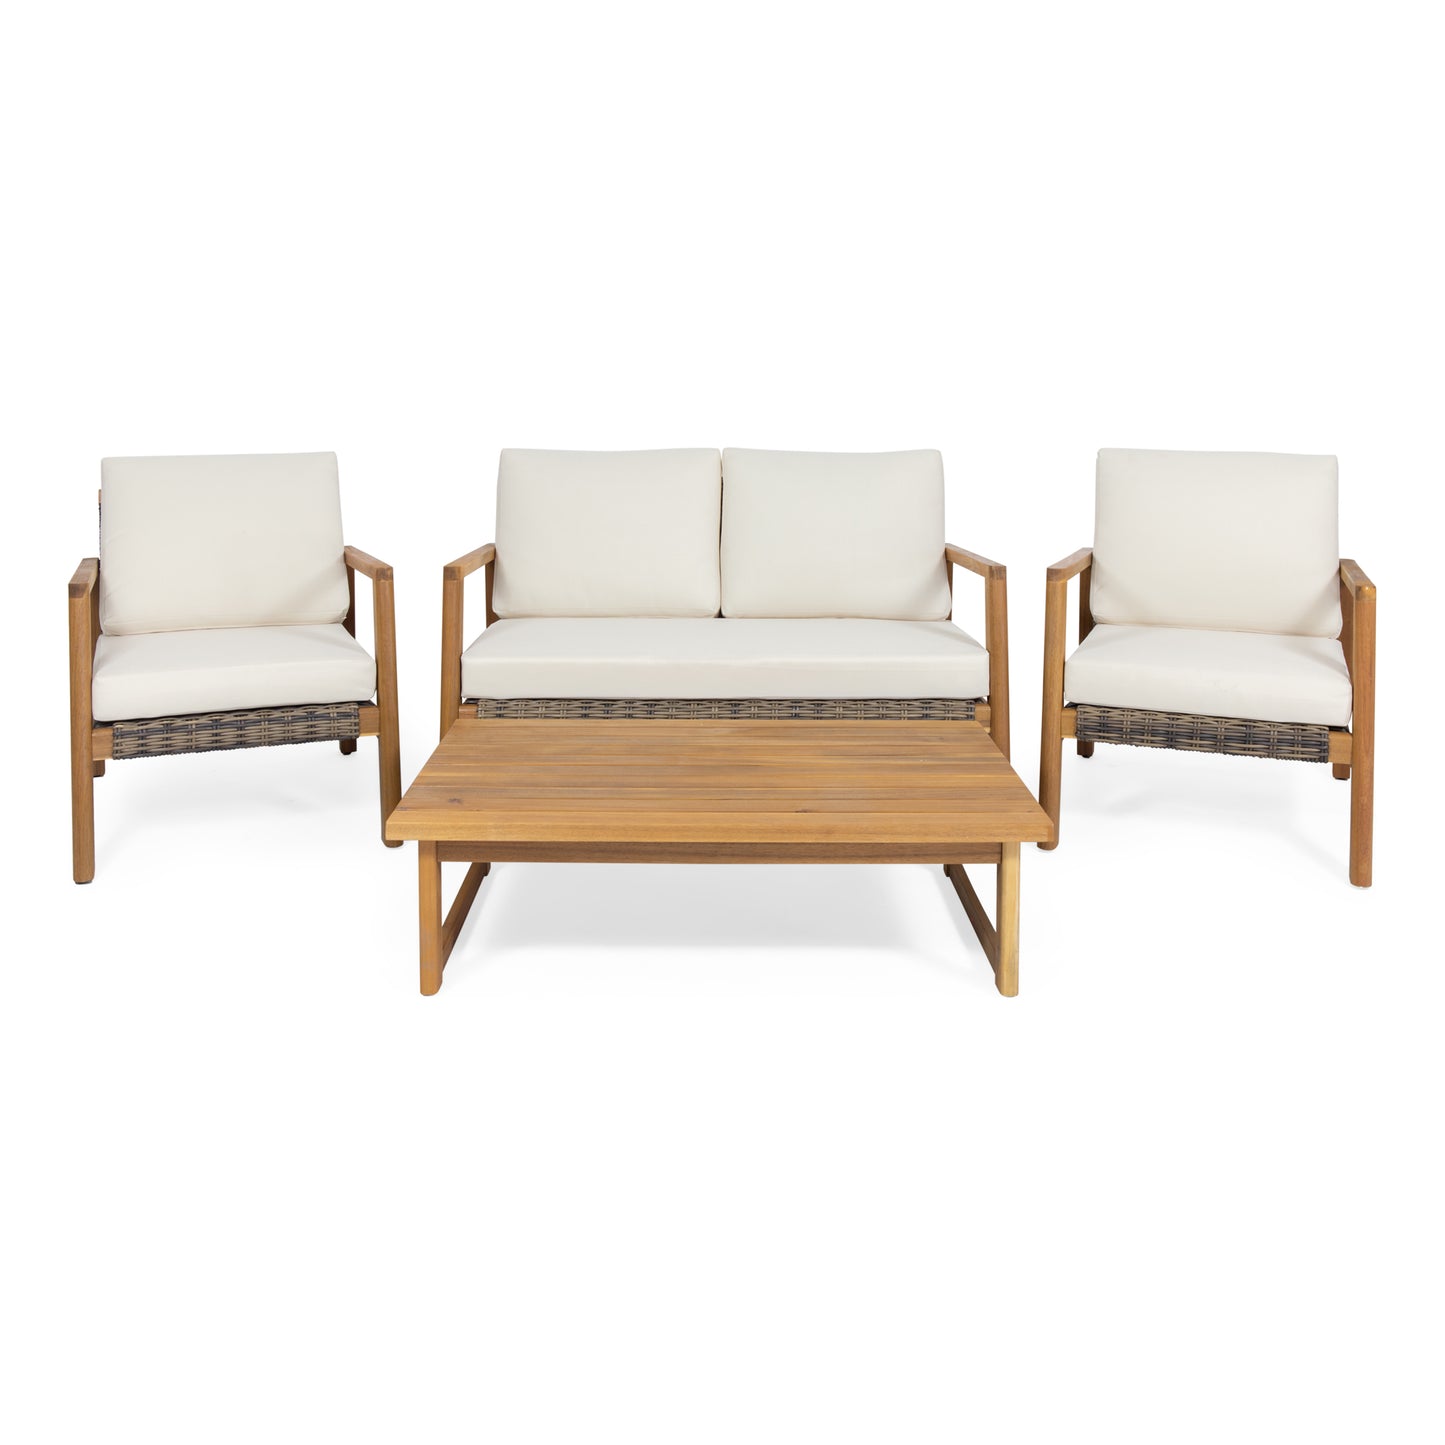 Kedan Outdoor 4 Seater Acacia Wood Chat Set with Wicker Accents